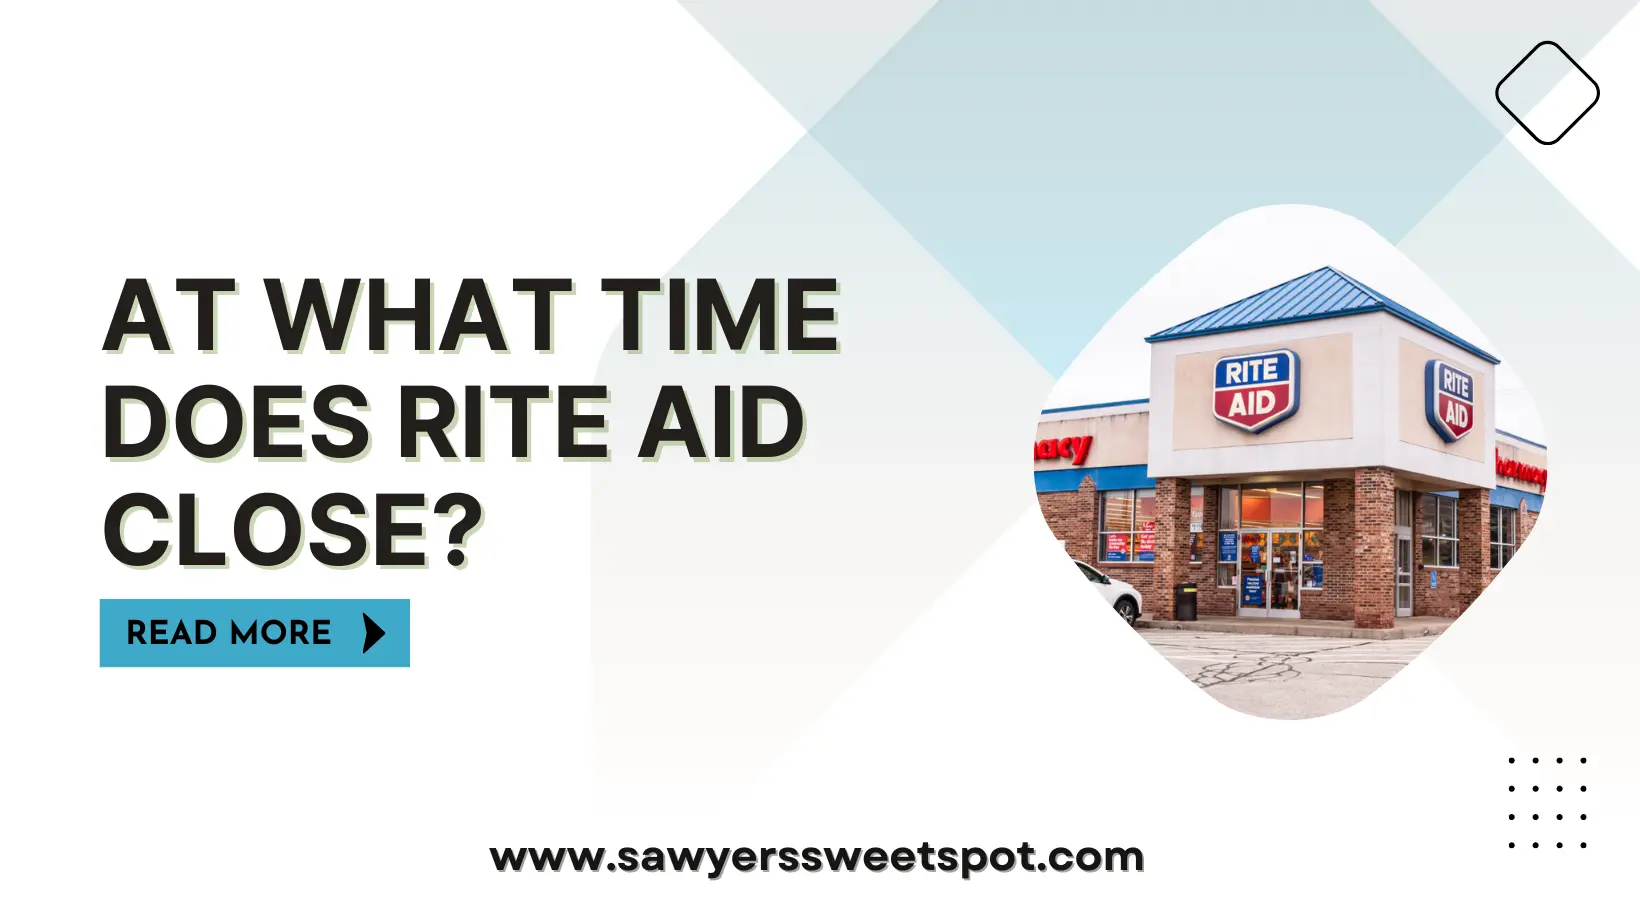 At What Time Does Rite Aid Close?